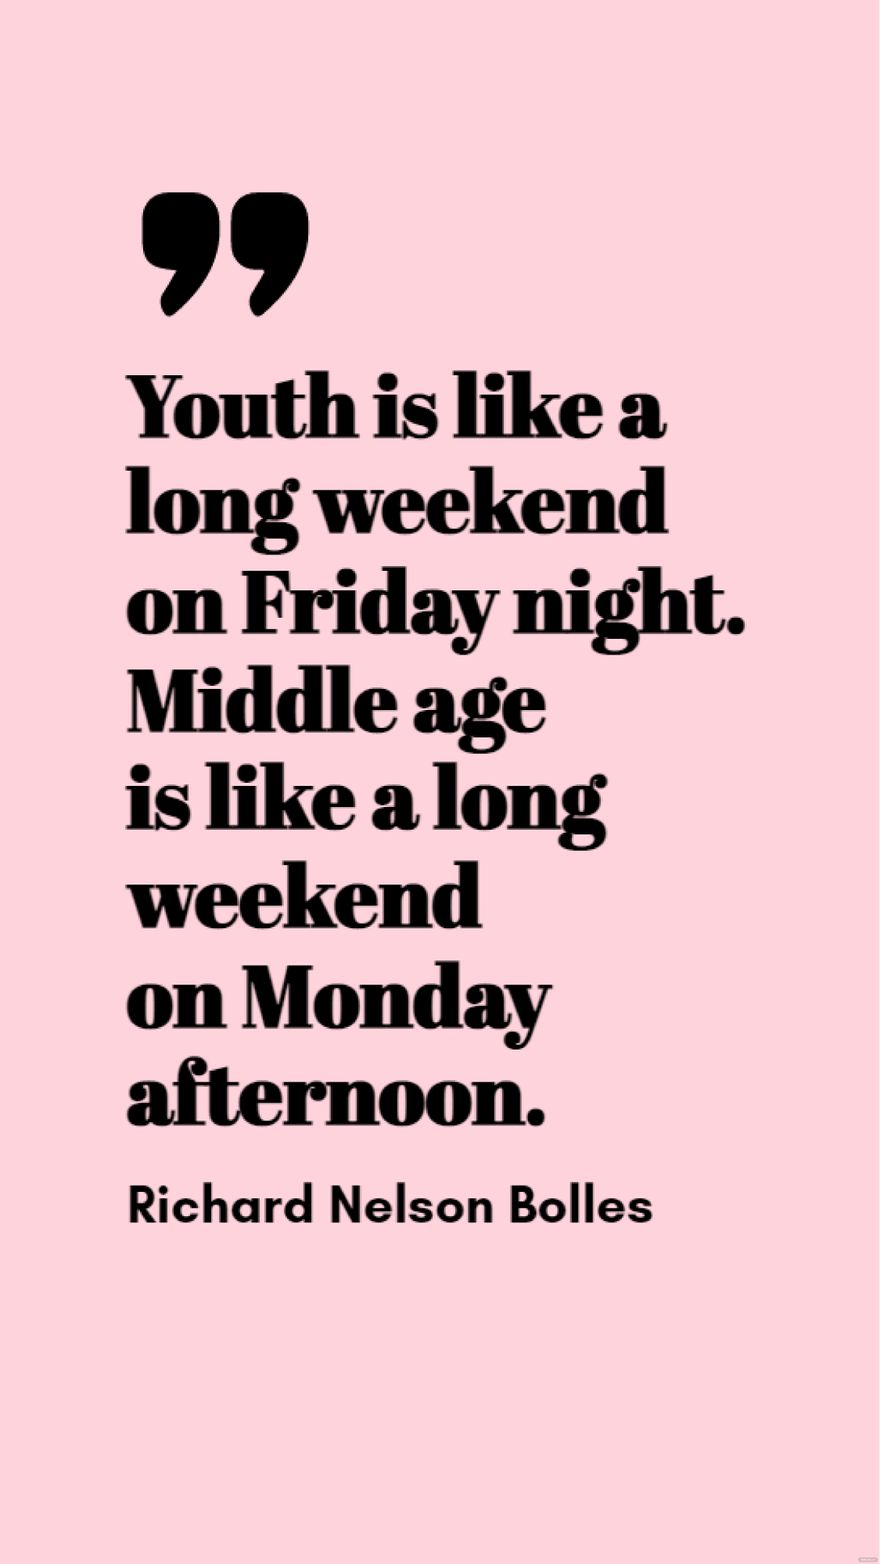 Richard Nelson Bolles - Youth is like a long weekend on Friday night. Middle age is like a long weekend on Monday afternoon.